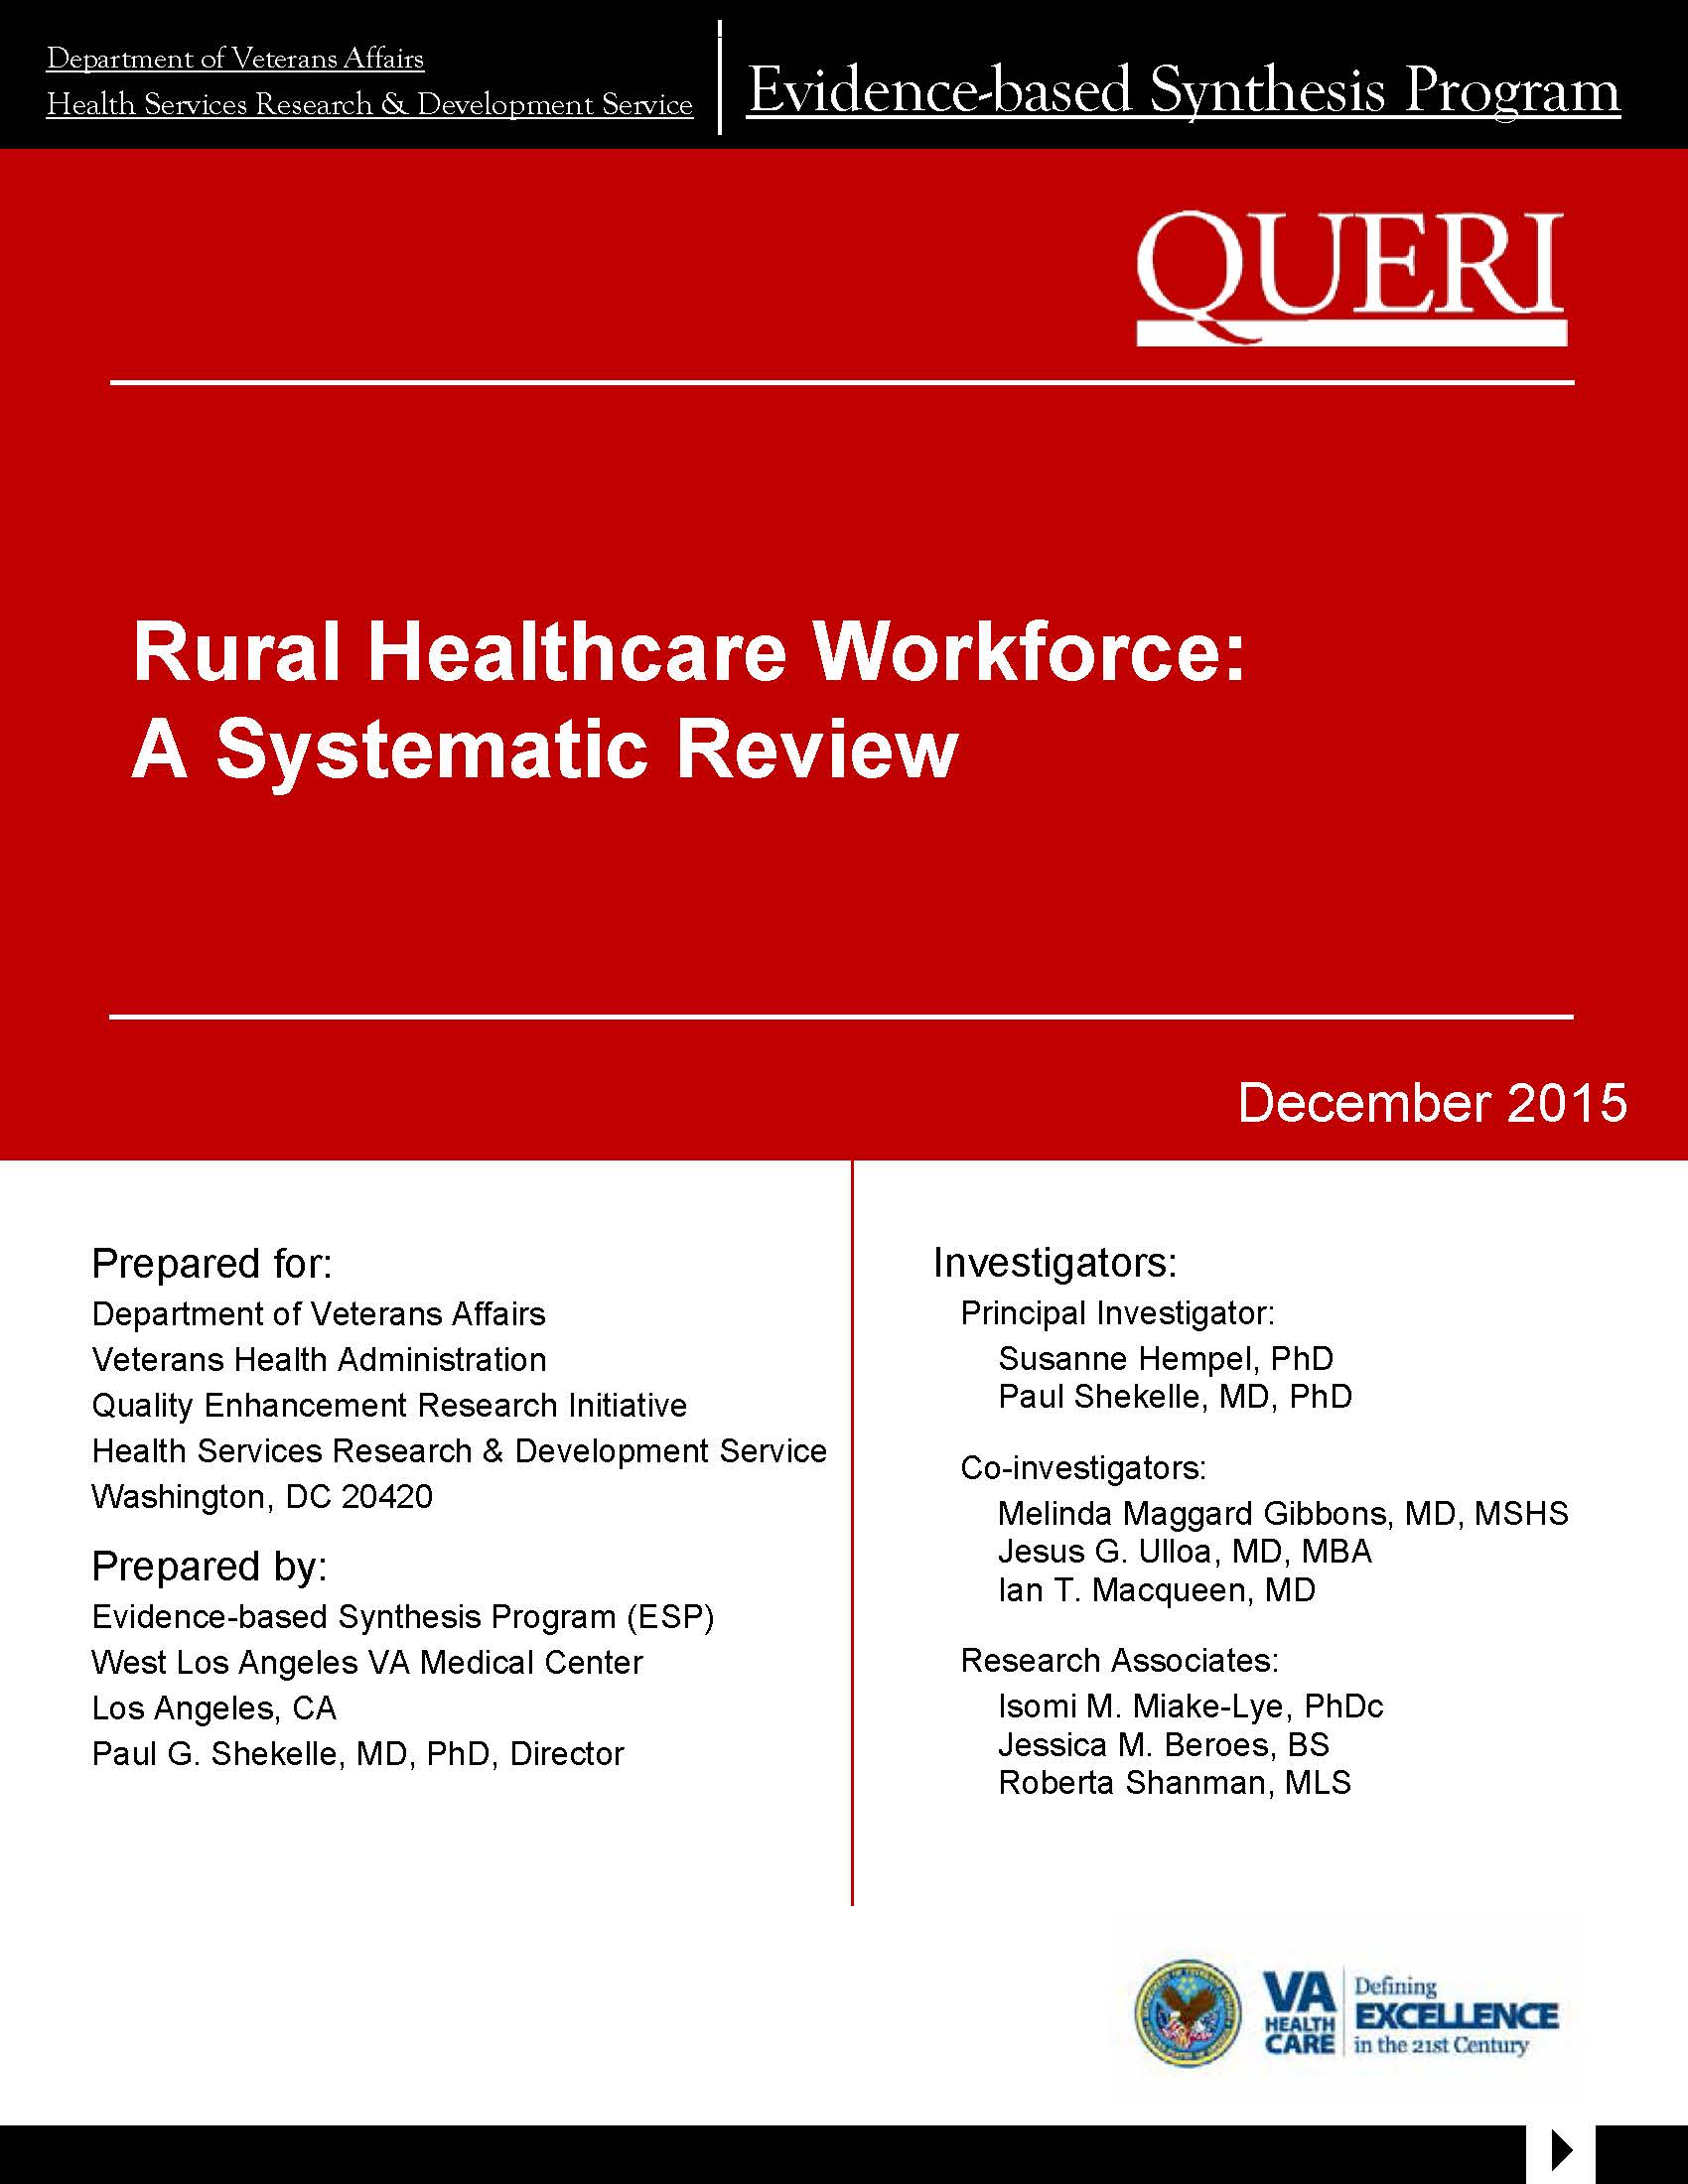 Rural Healthcare Workforce: A Systematic Review